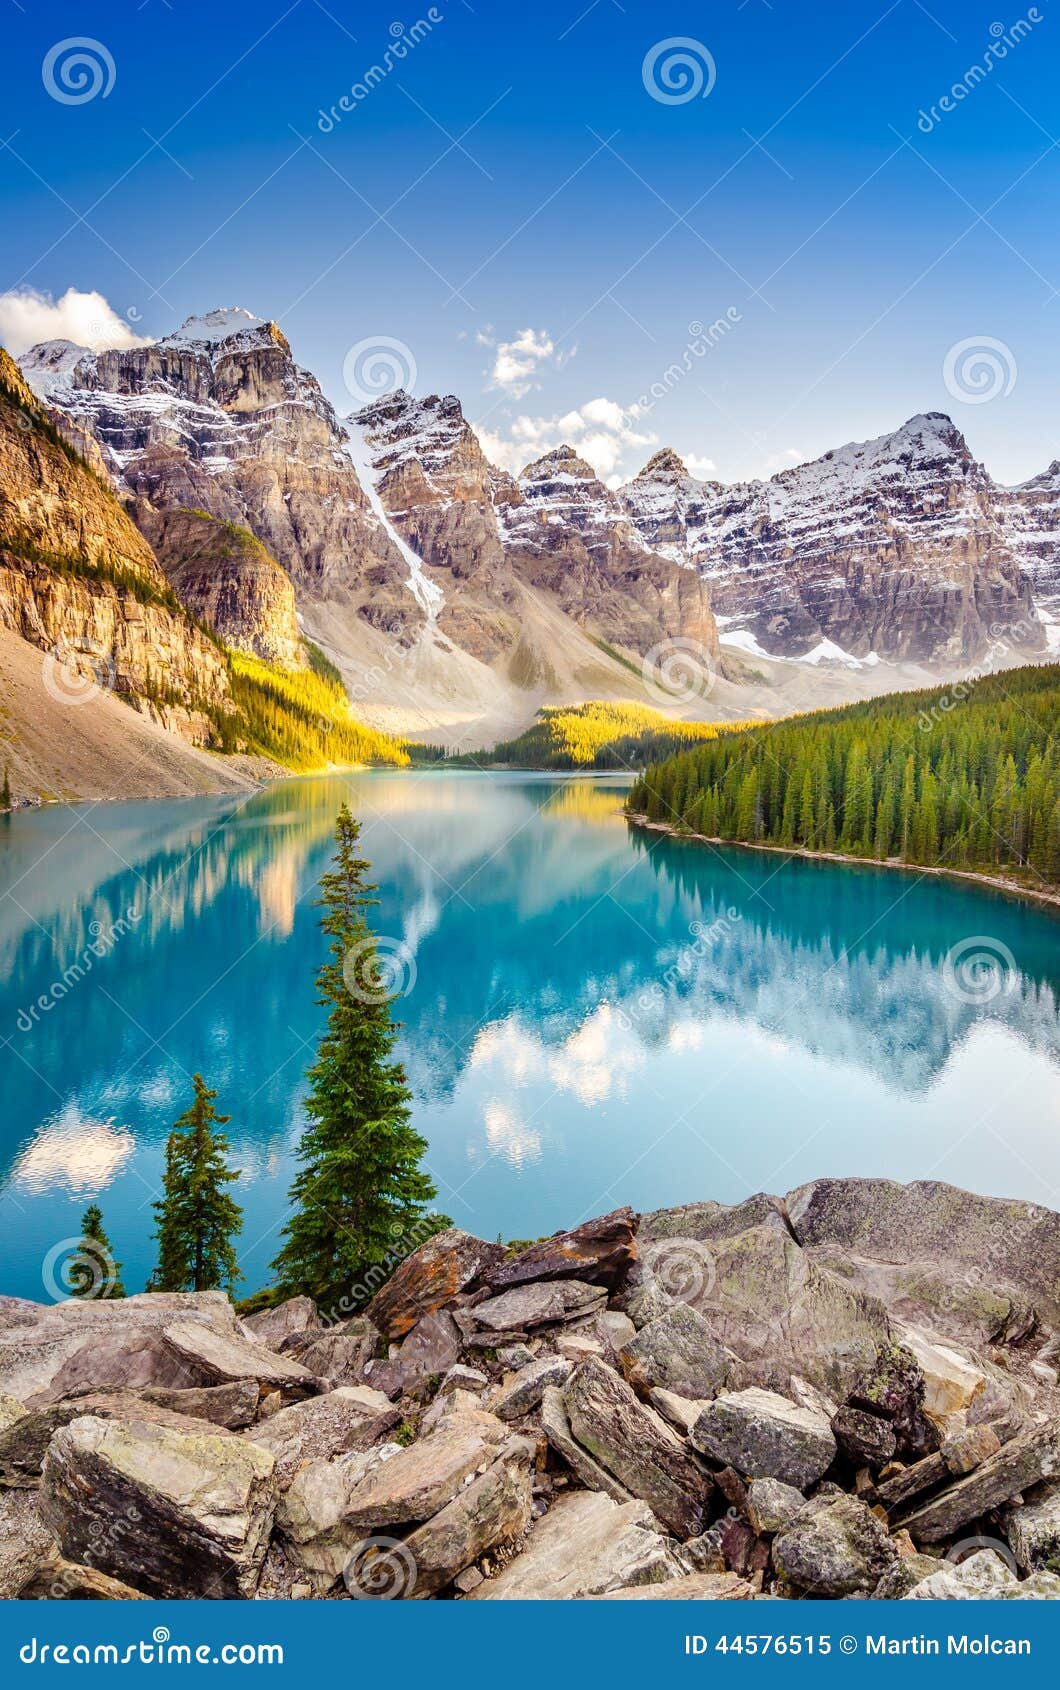 landscape view of moraine lake in canadian rocky mountains